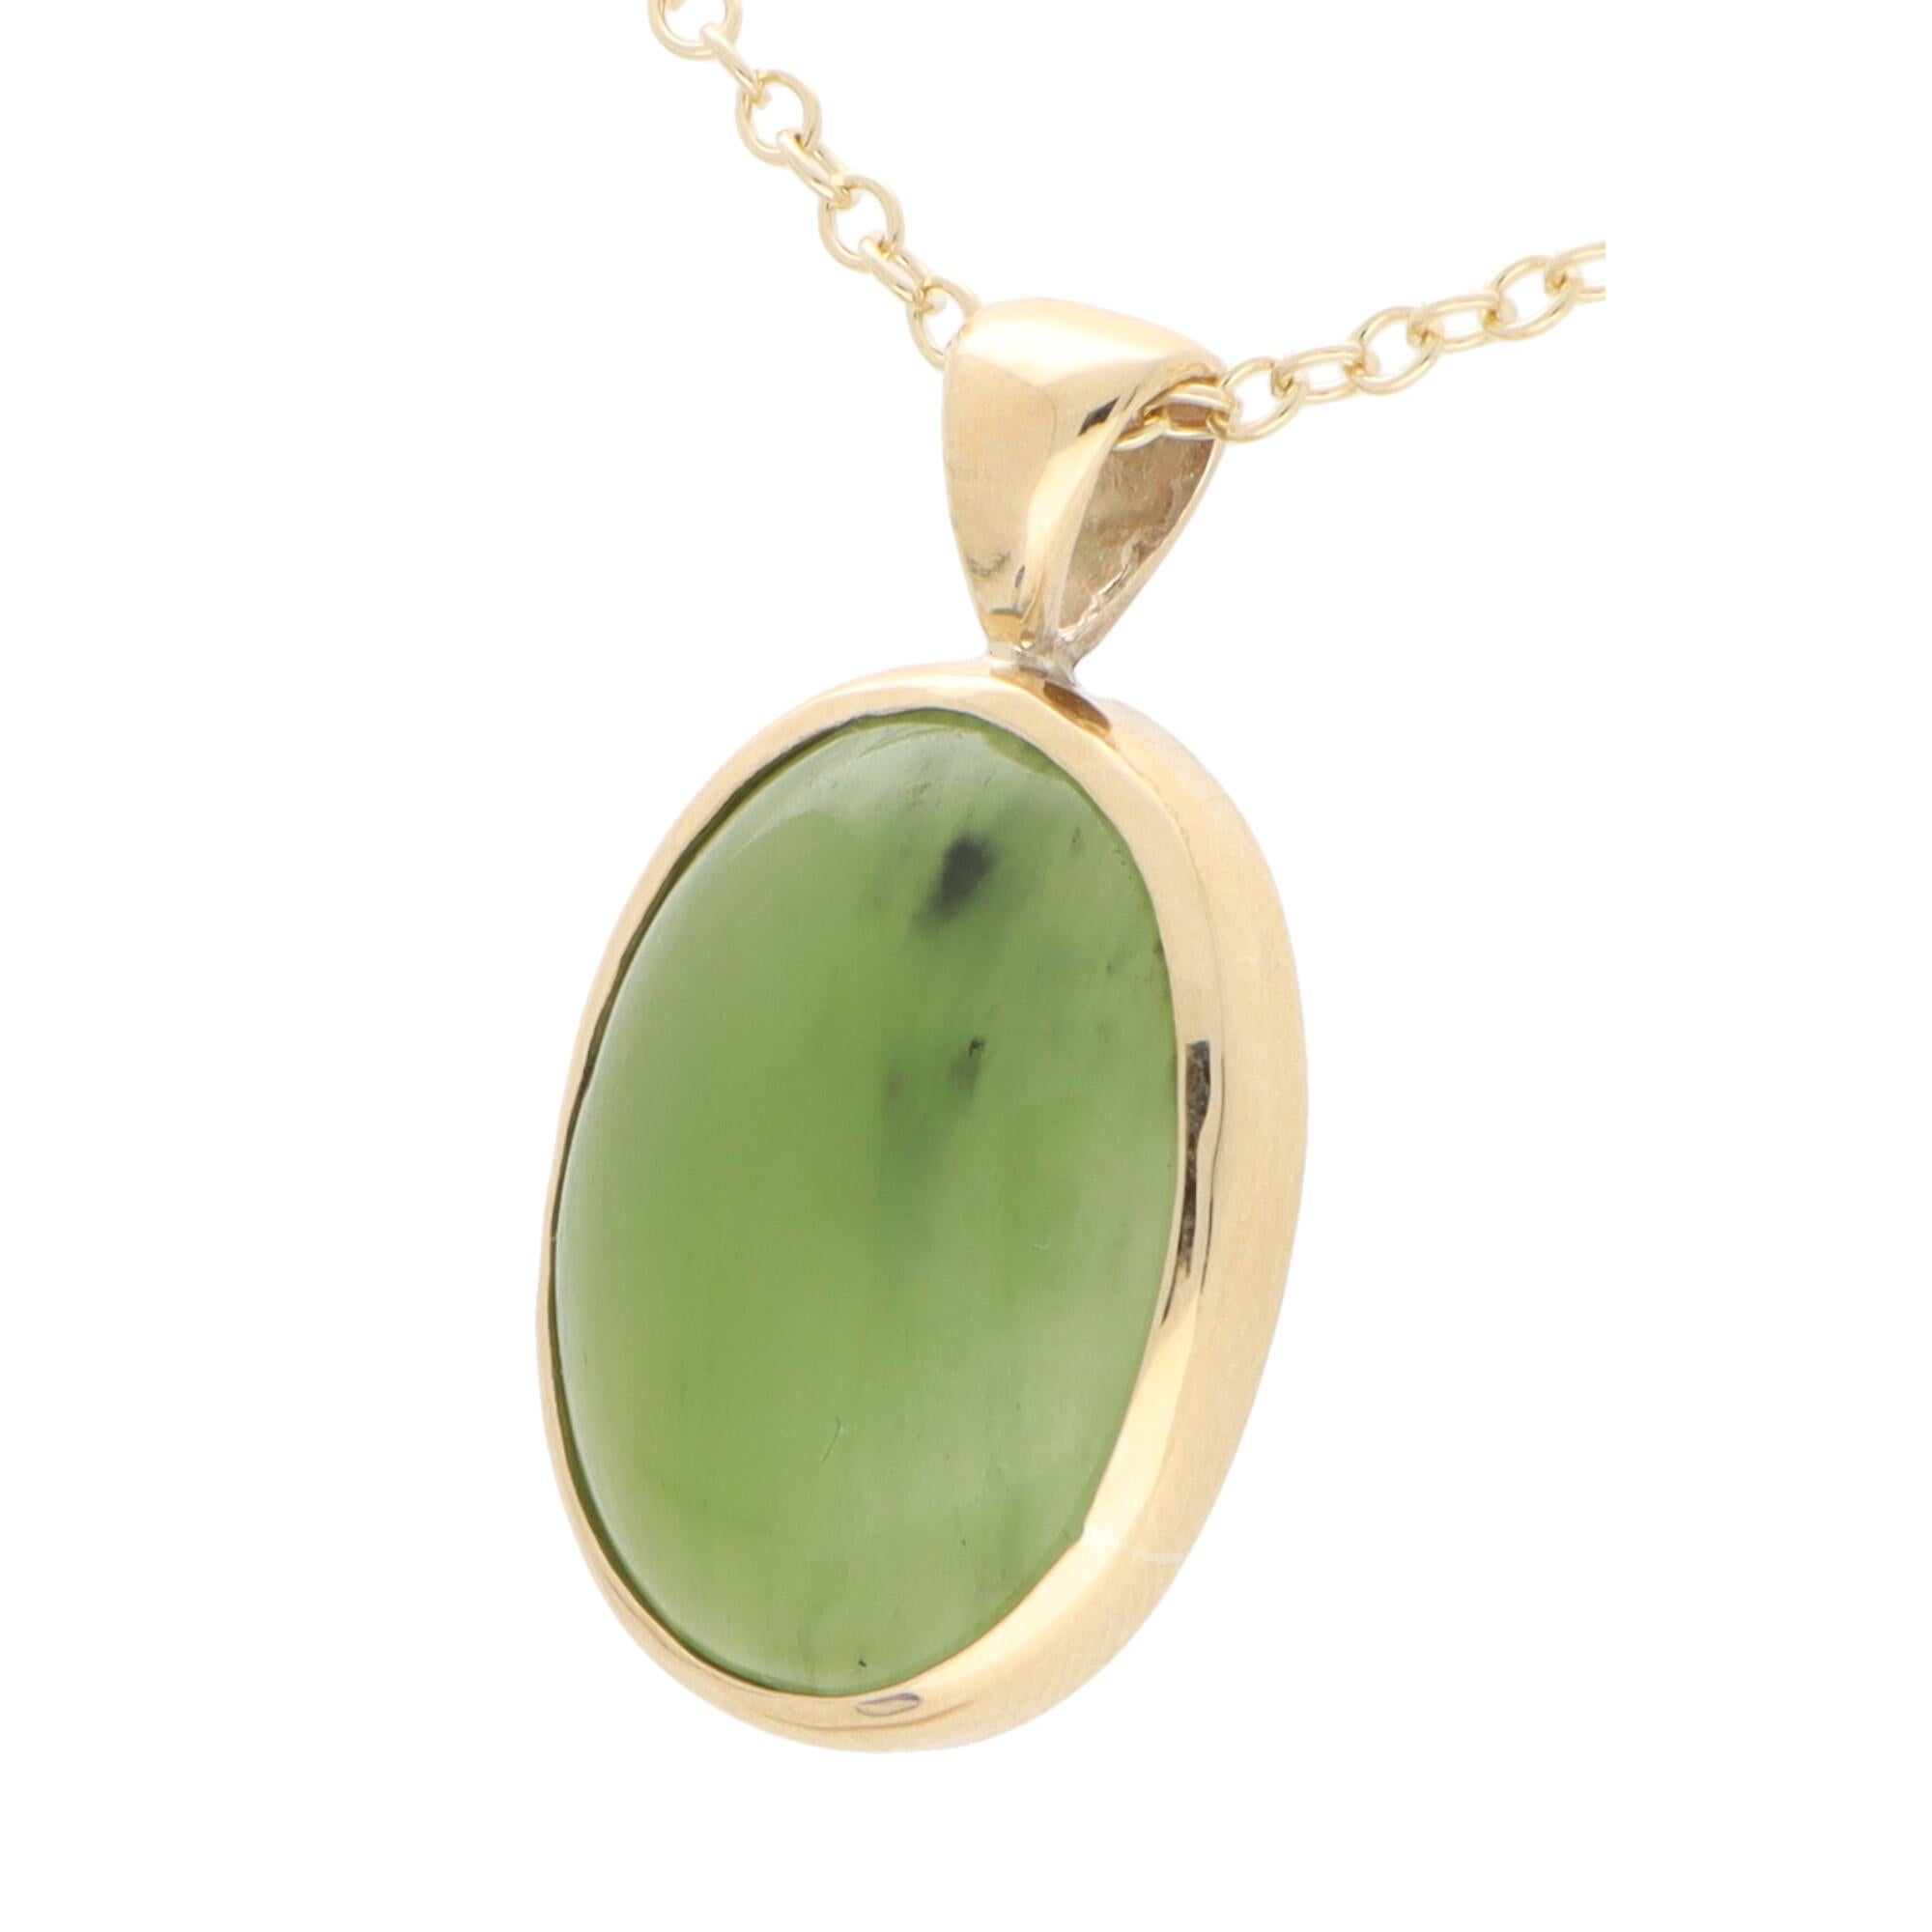 A beautiful cabochon nephrite pendant set in 9k yellow gold.

The pendant solely features a vibrant green nephrite with is simply bezel set securely in 9k yellow gold. The pendant hangs from a matching 9k yellow gold trace chain. The chain measures